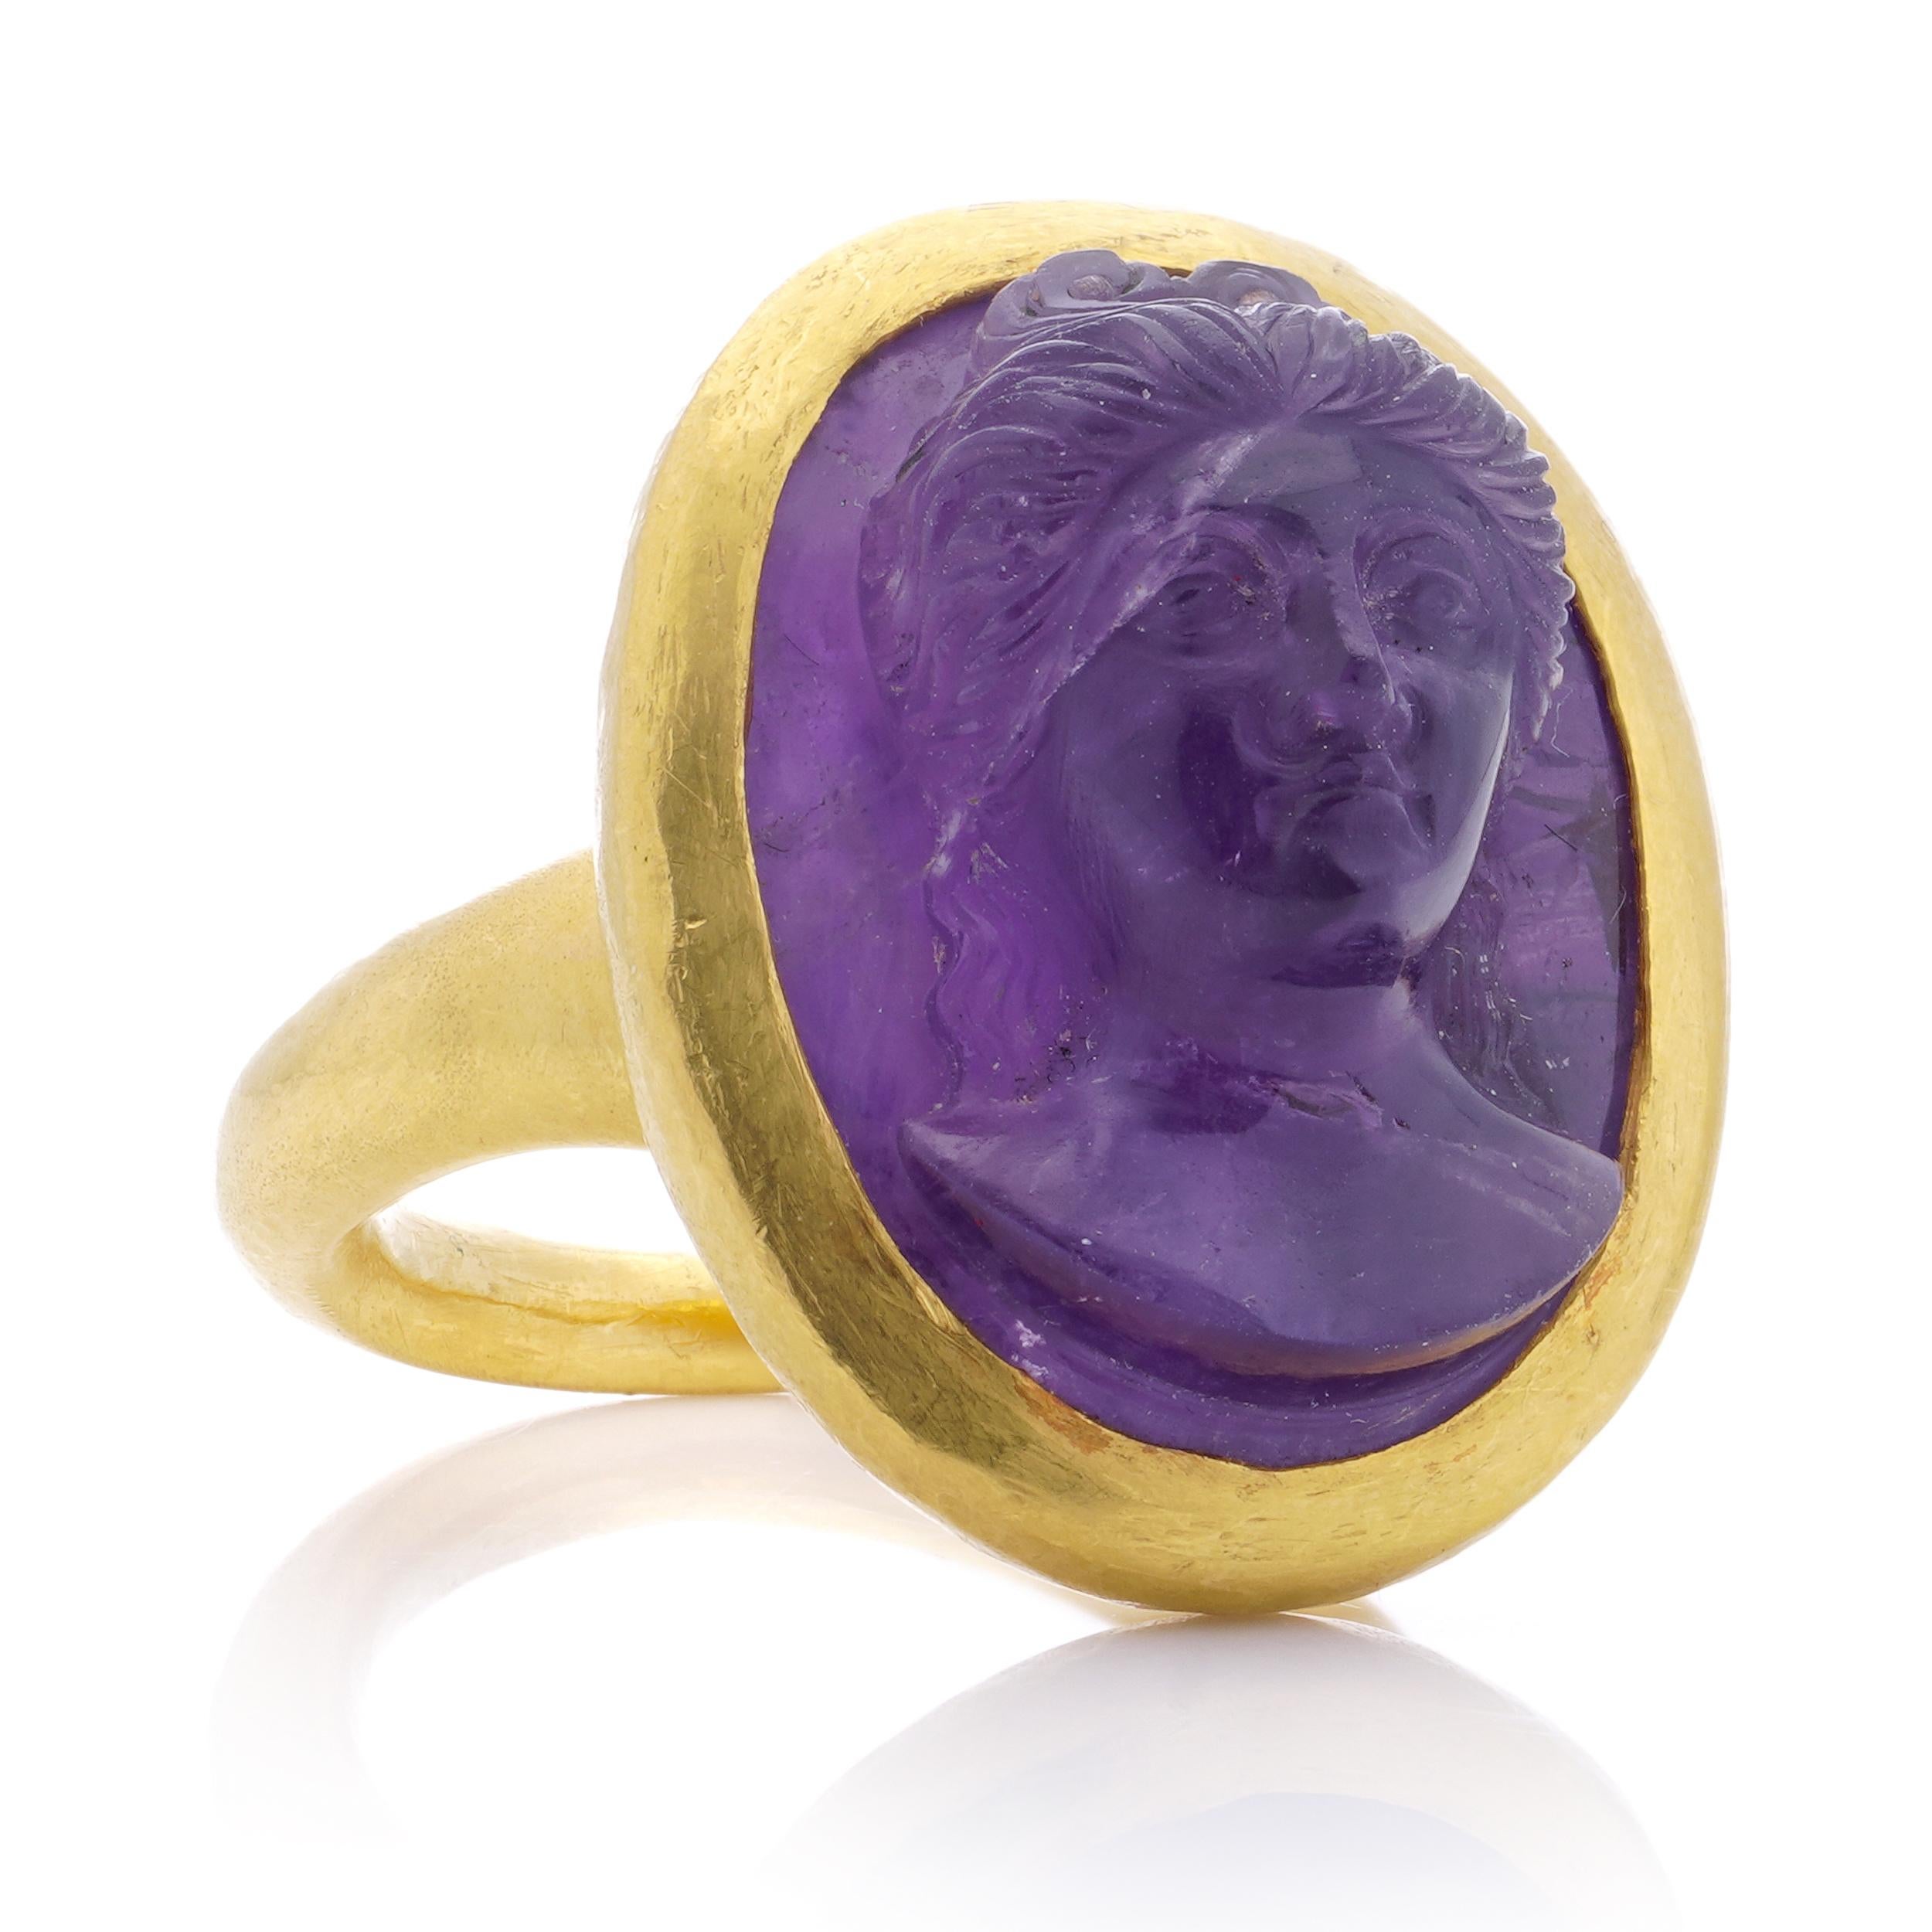  24kt. yellow gold carved amethyst intaglio ring with a woman's portrait For Sale 5